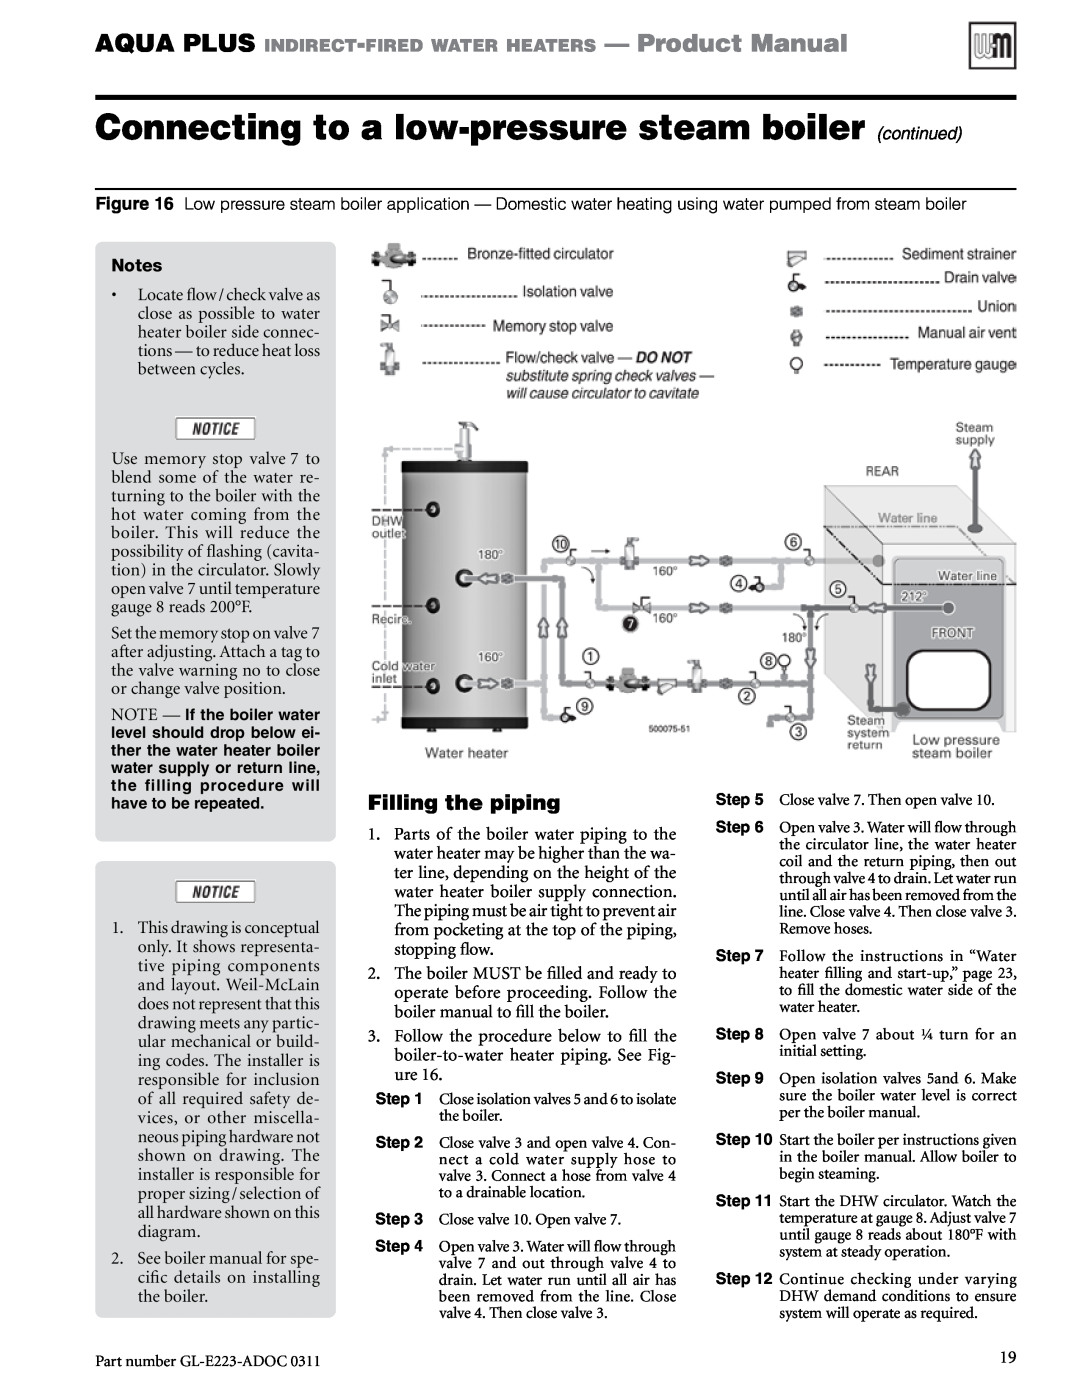 Weil-McLain GL-E223-ADOC 0311 manual Filling the piping 